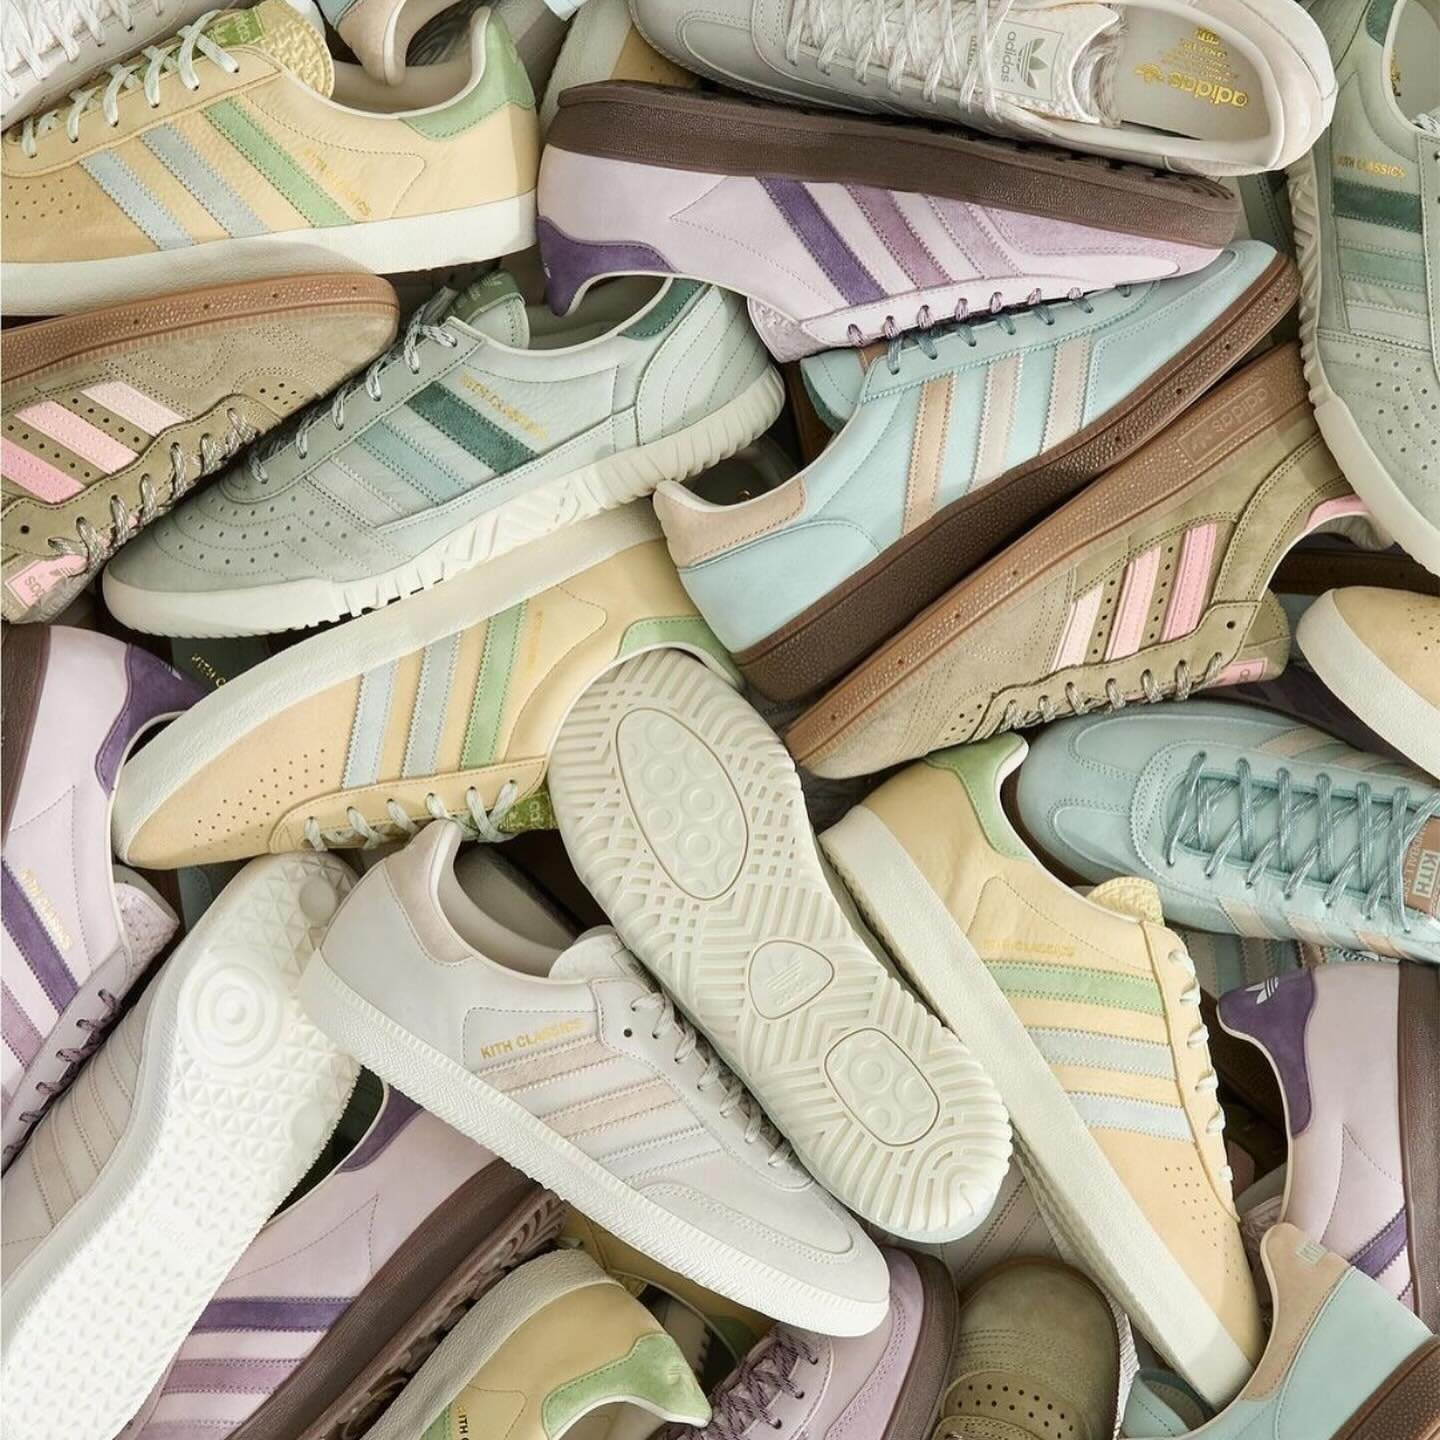 Introducing KITH Classics for adidas Originals Summer 2024!

Get a sneak peek into KITH Summer 2024 with their latest collaboration. Explore the iconic Samba, AS350, Gazelle Indoor, Handball Spezial, Handball Top, and Indoor Super styles.

Launching 